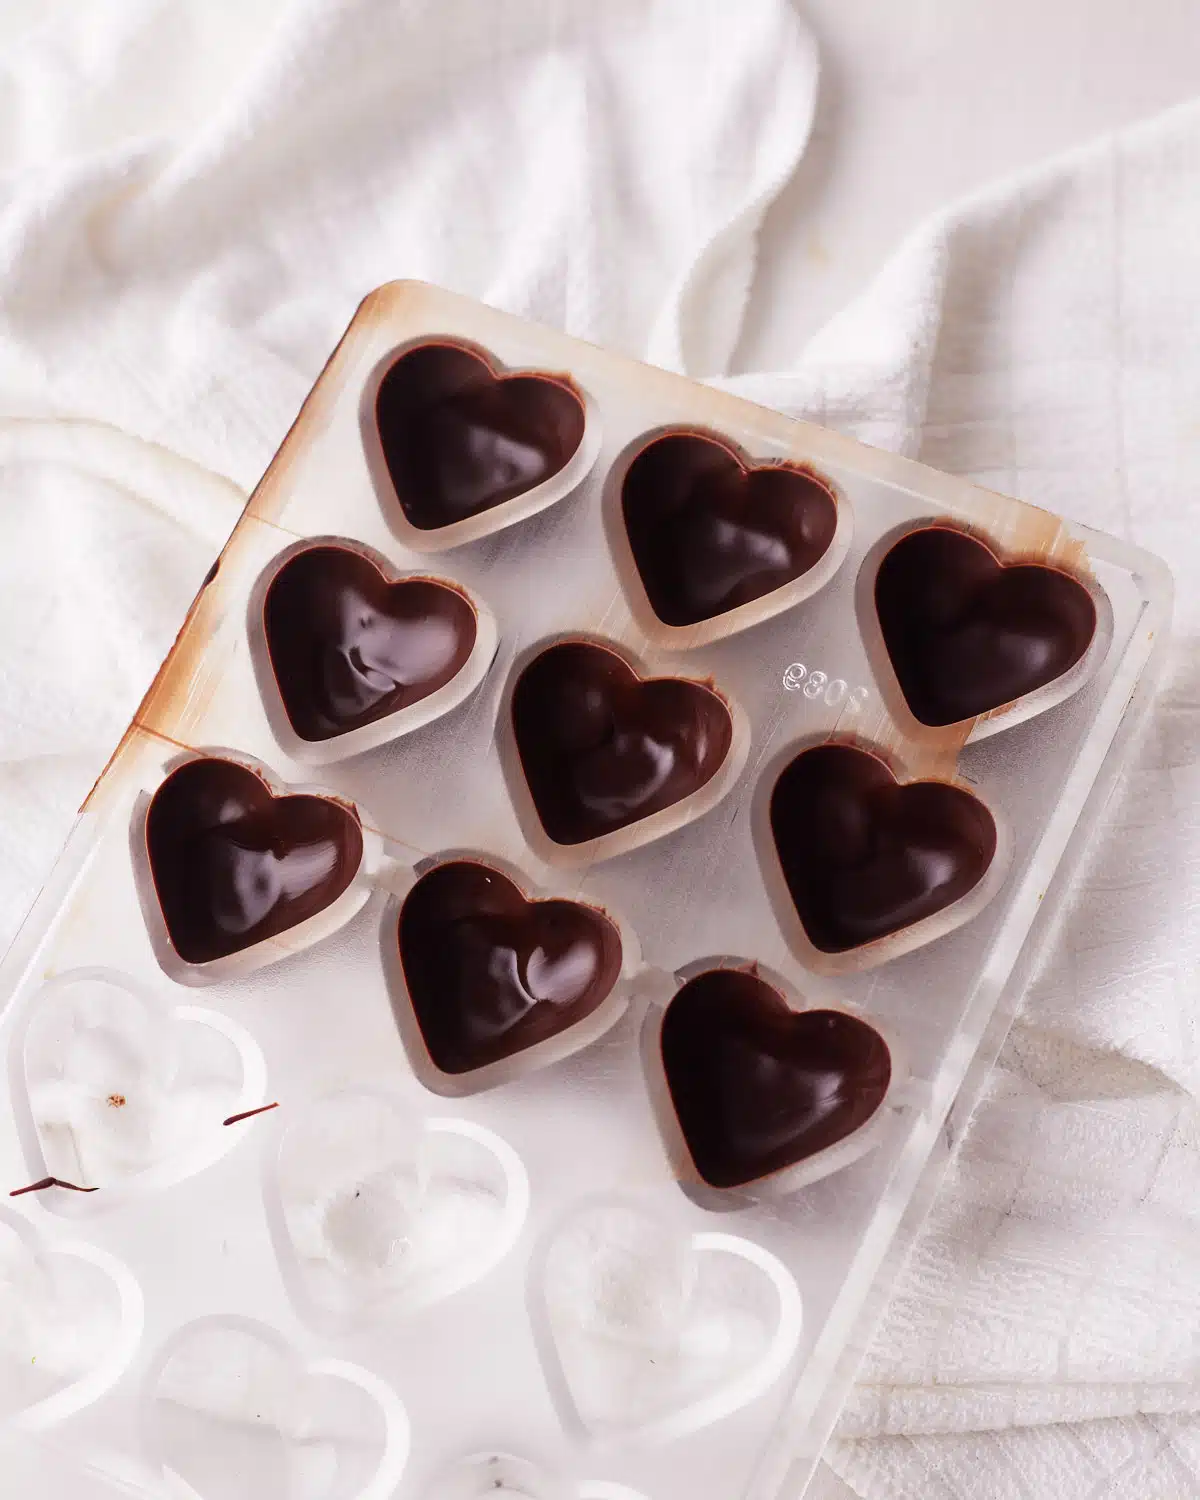 putting chocolate in a heart shaped mold to make cookie dough bites.